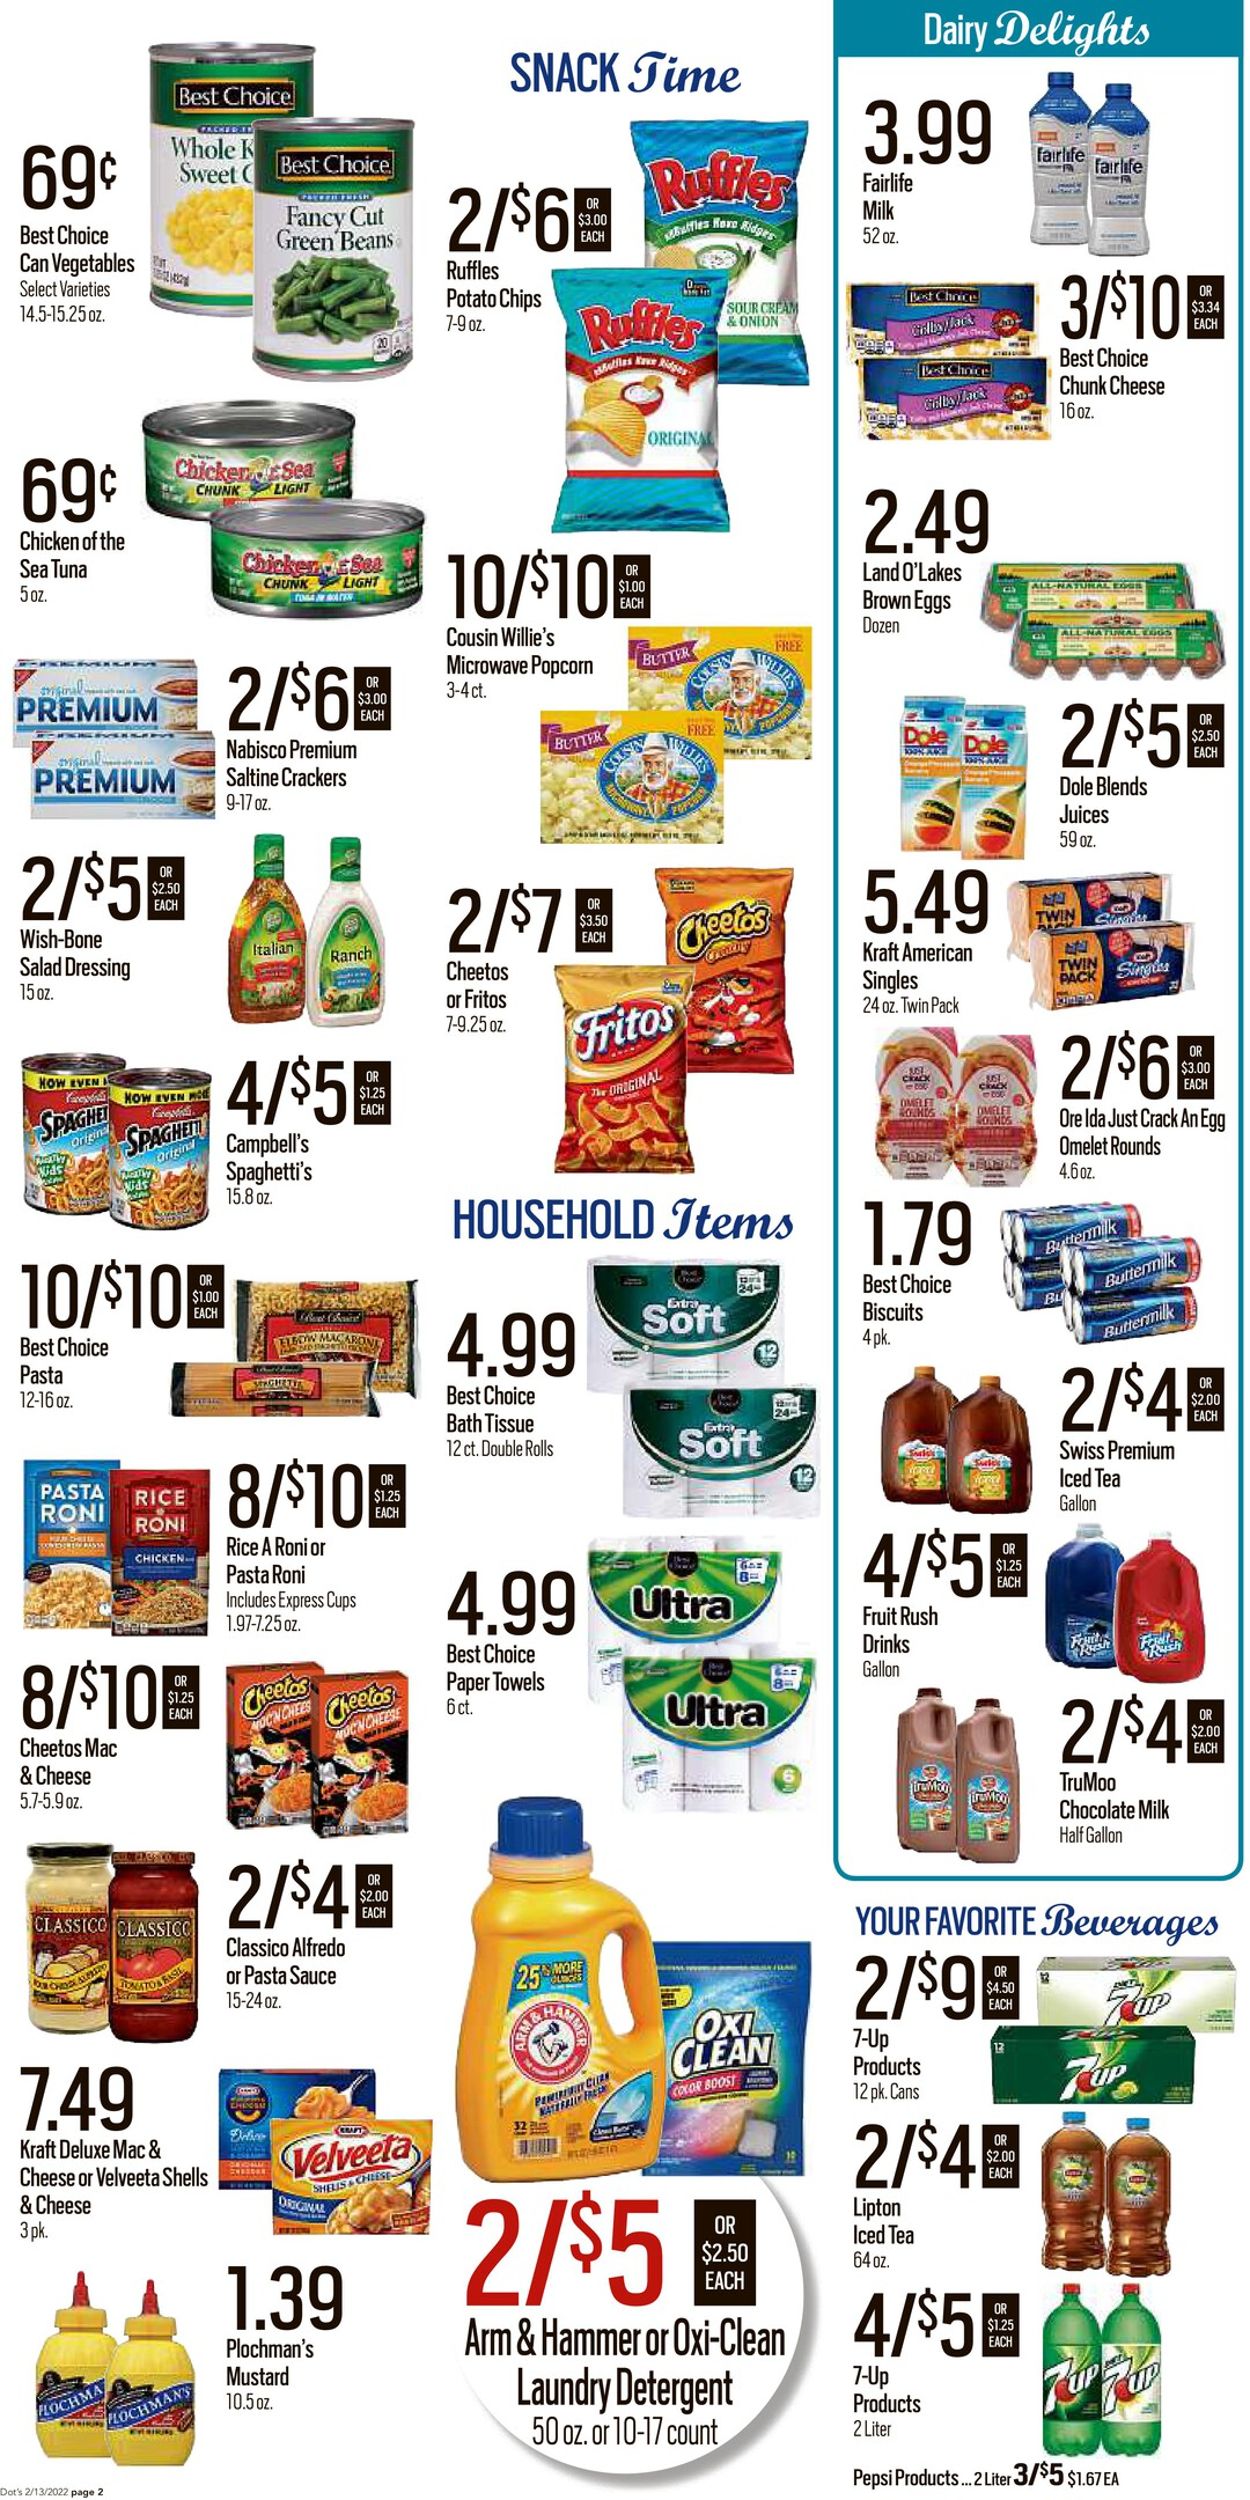 Dot's Market Ad from 02/14/2022